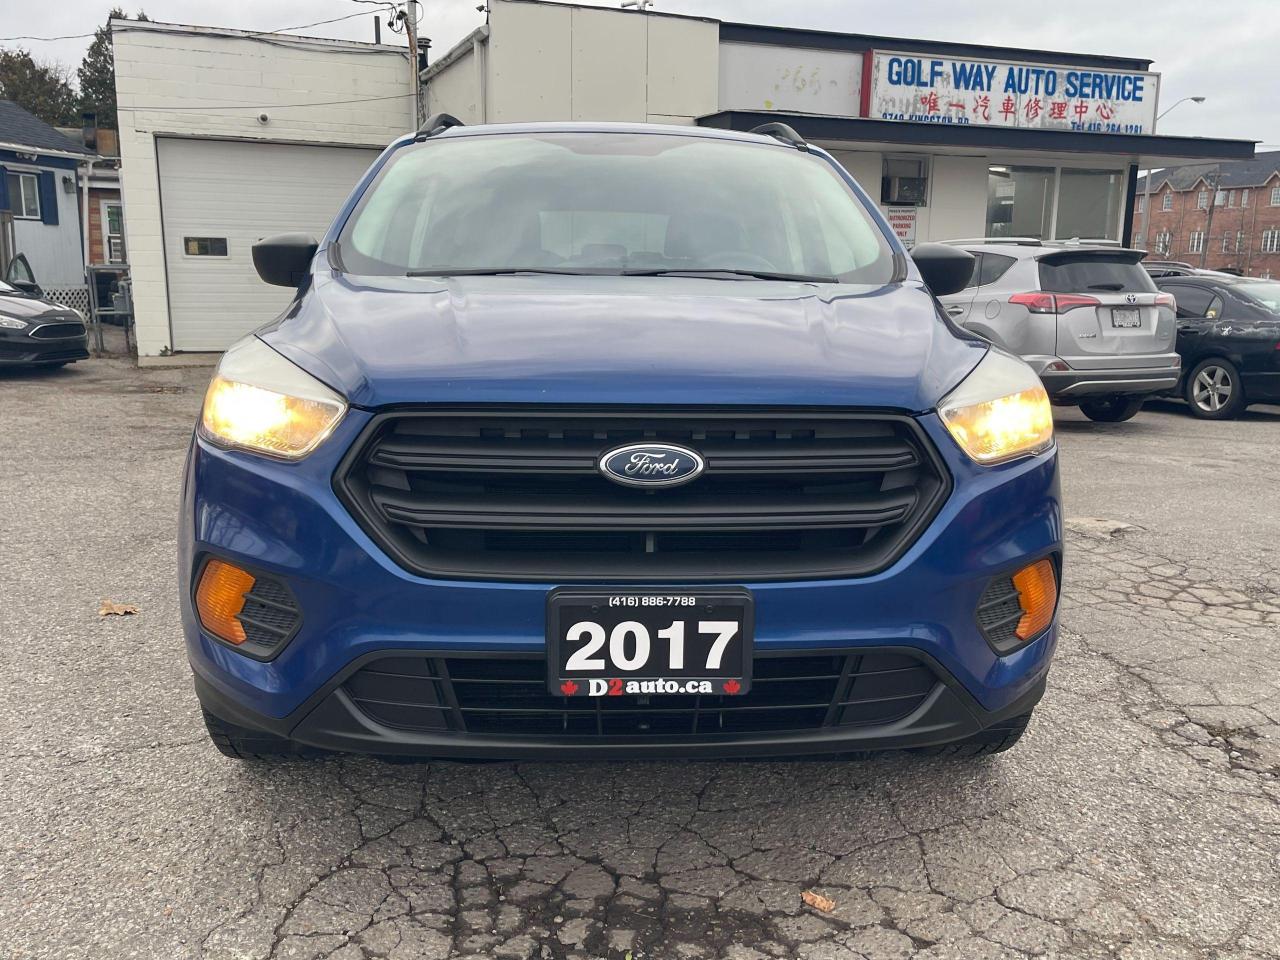 2017 Ford Escape BT/BACKUP CAMERA/GAS SAVER/NO ACCIDENT/CERTIFIED. - Photo #8